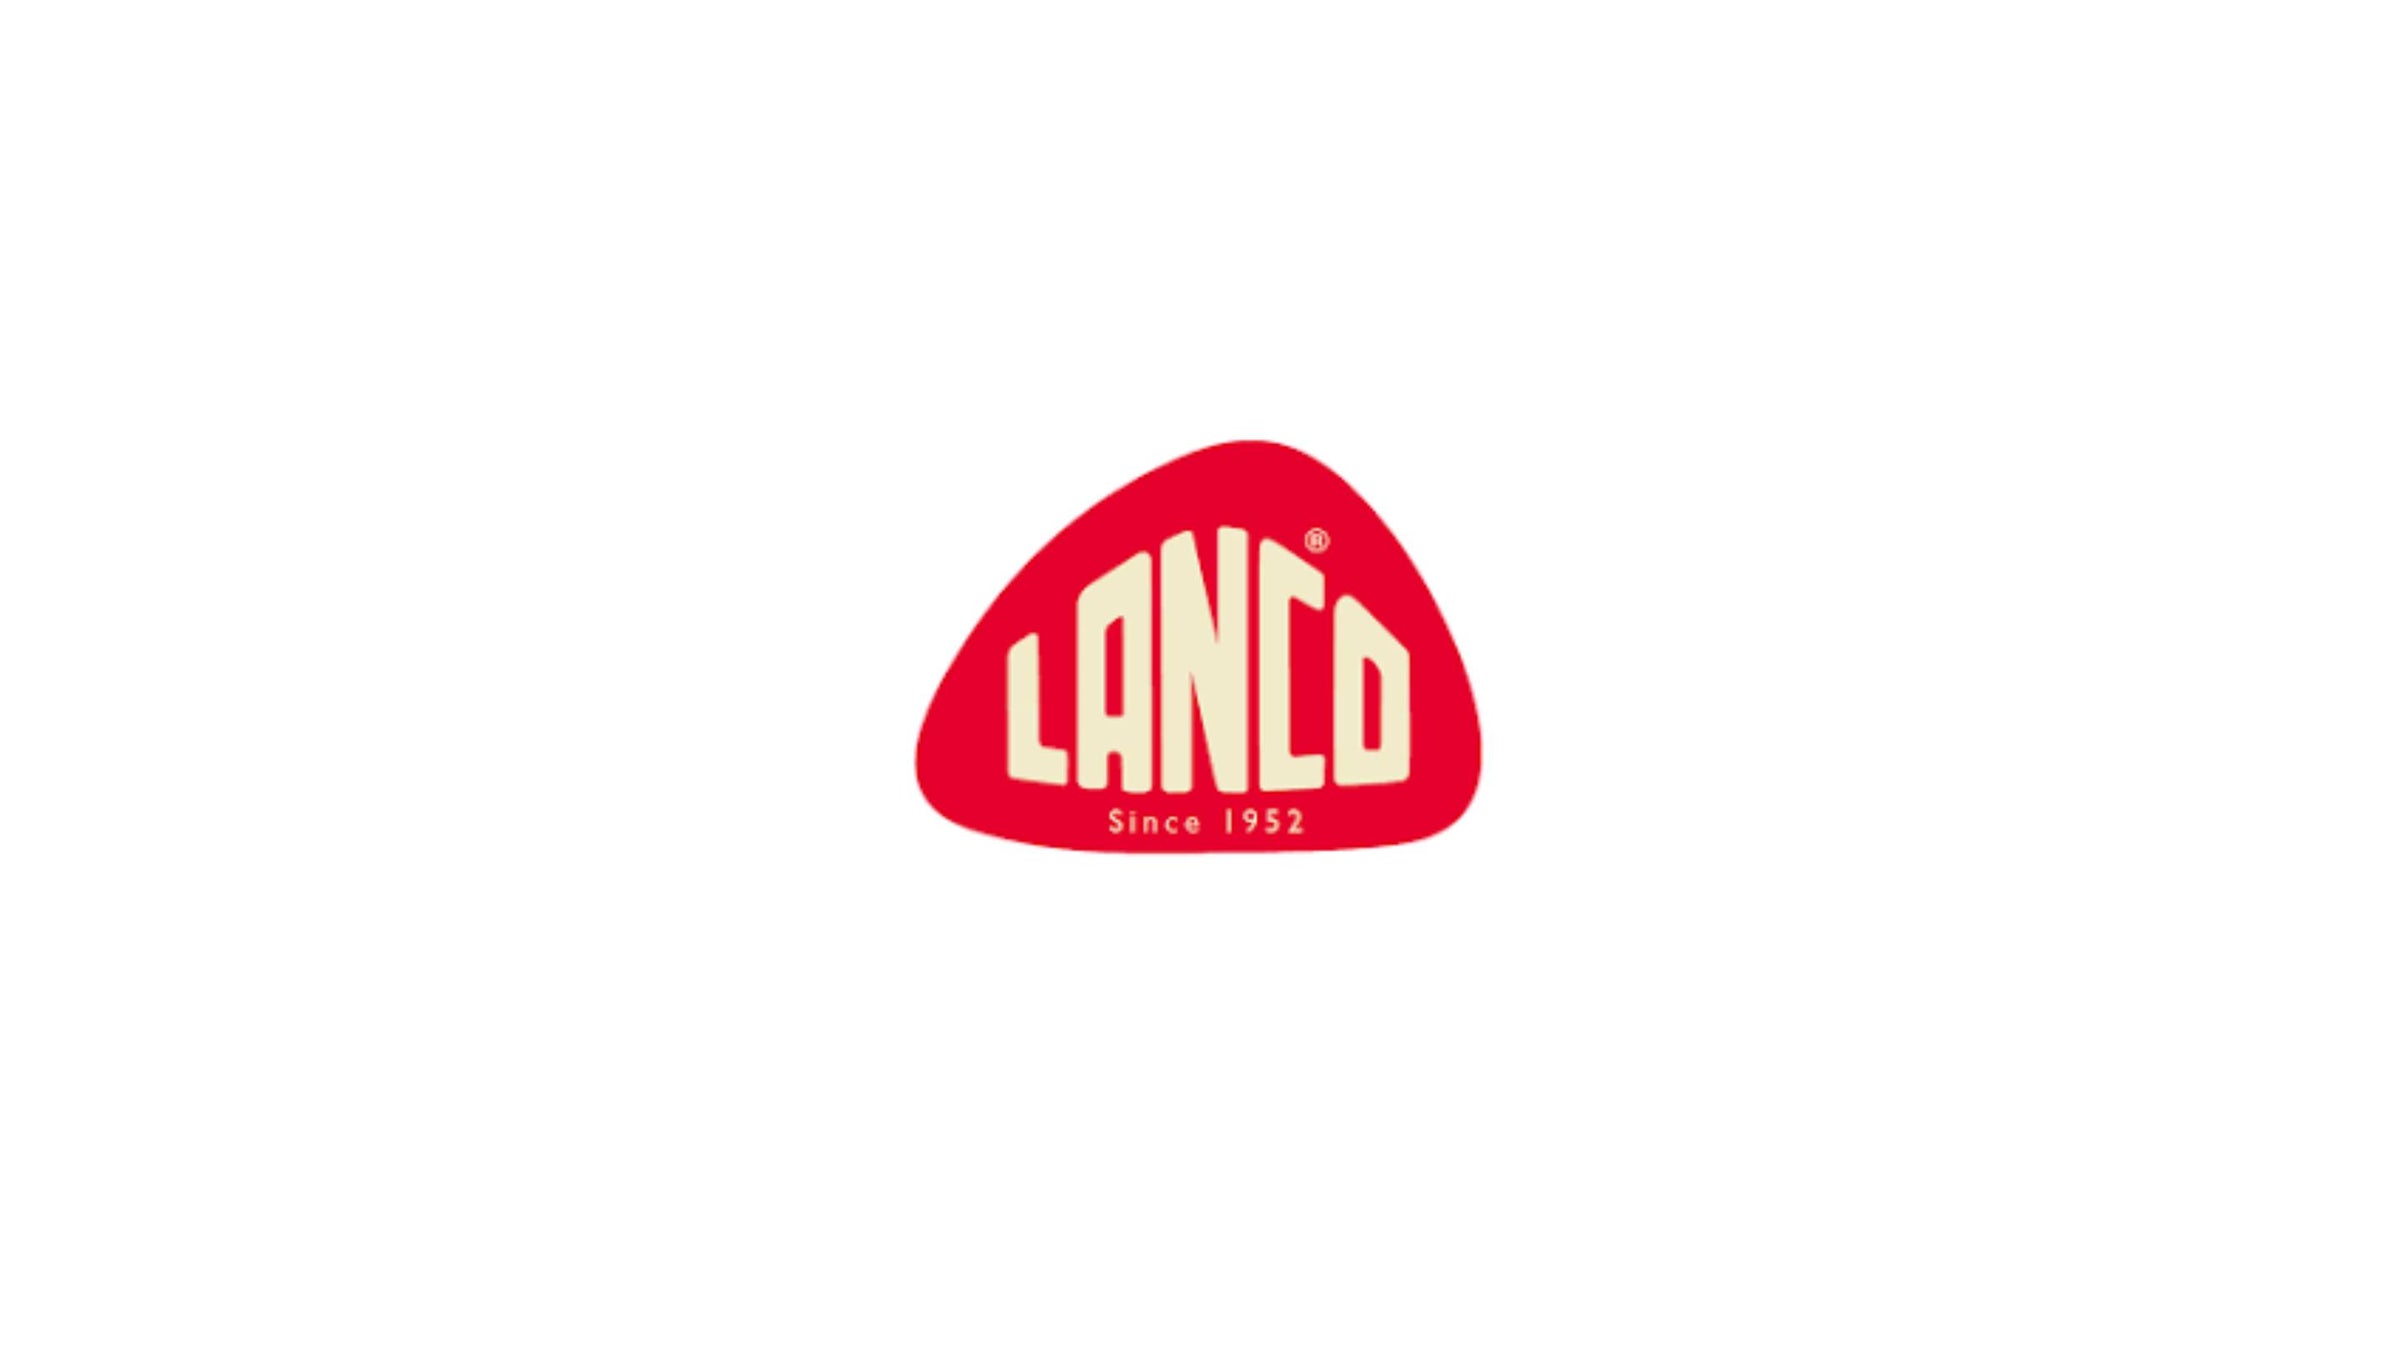 lanco logo. A red freeform shape with the word Lanco in beige text arranged to fit within the shape. 